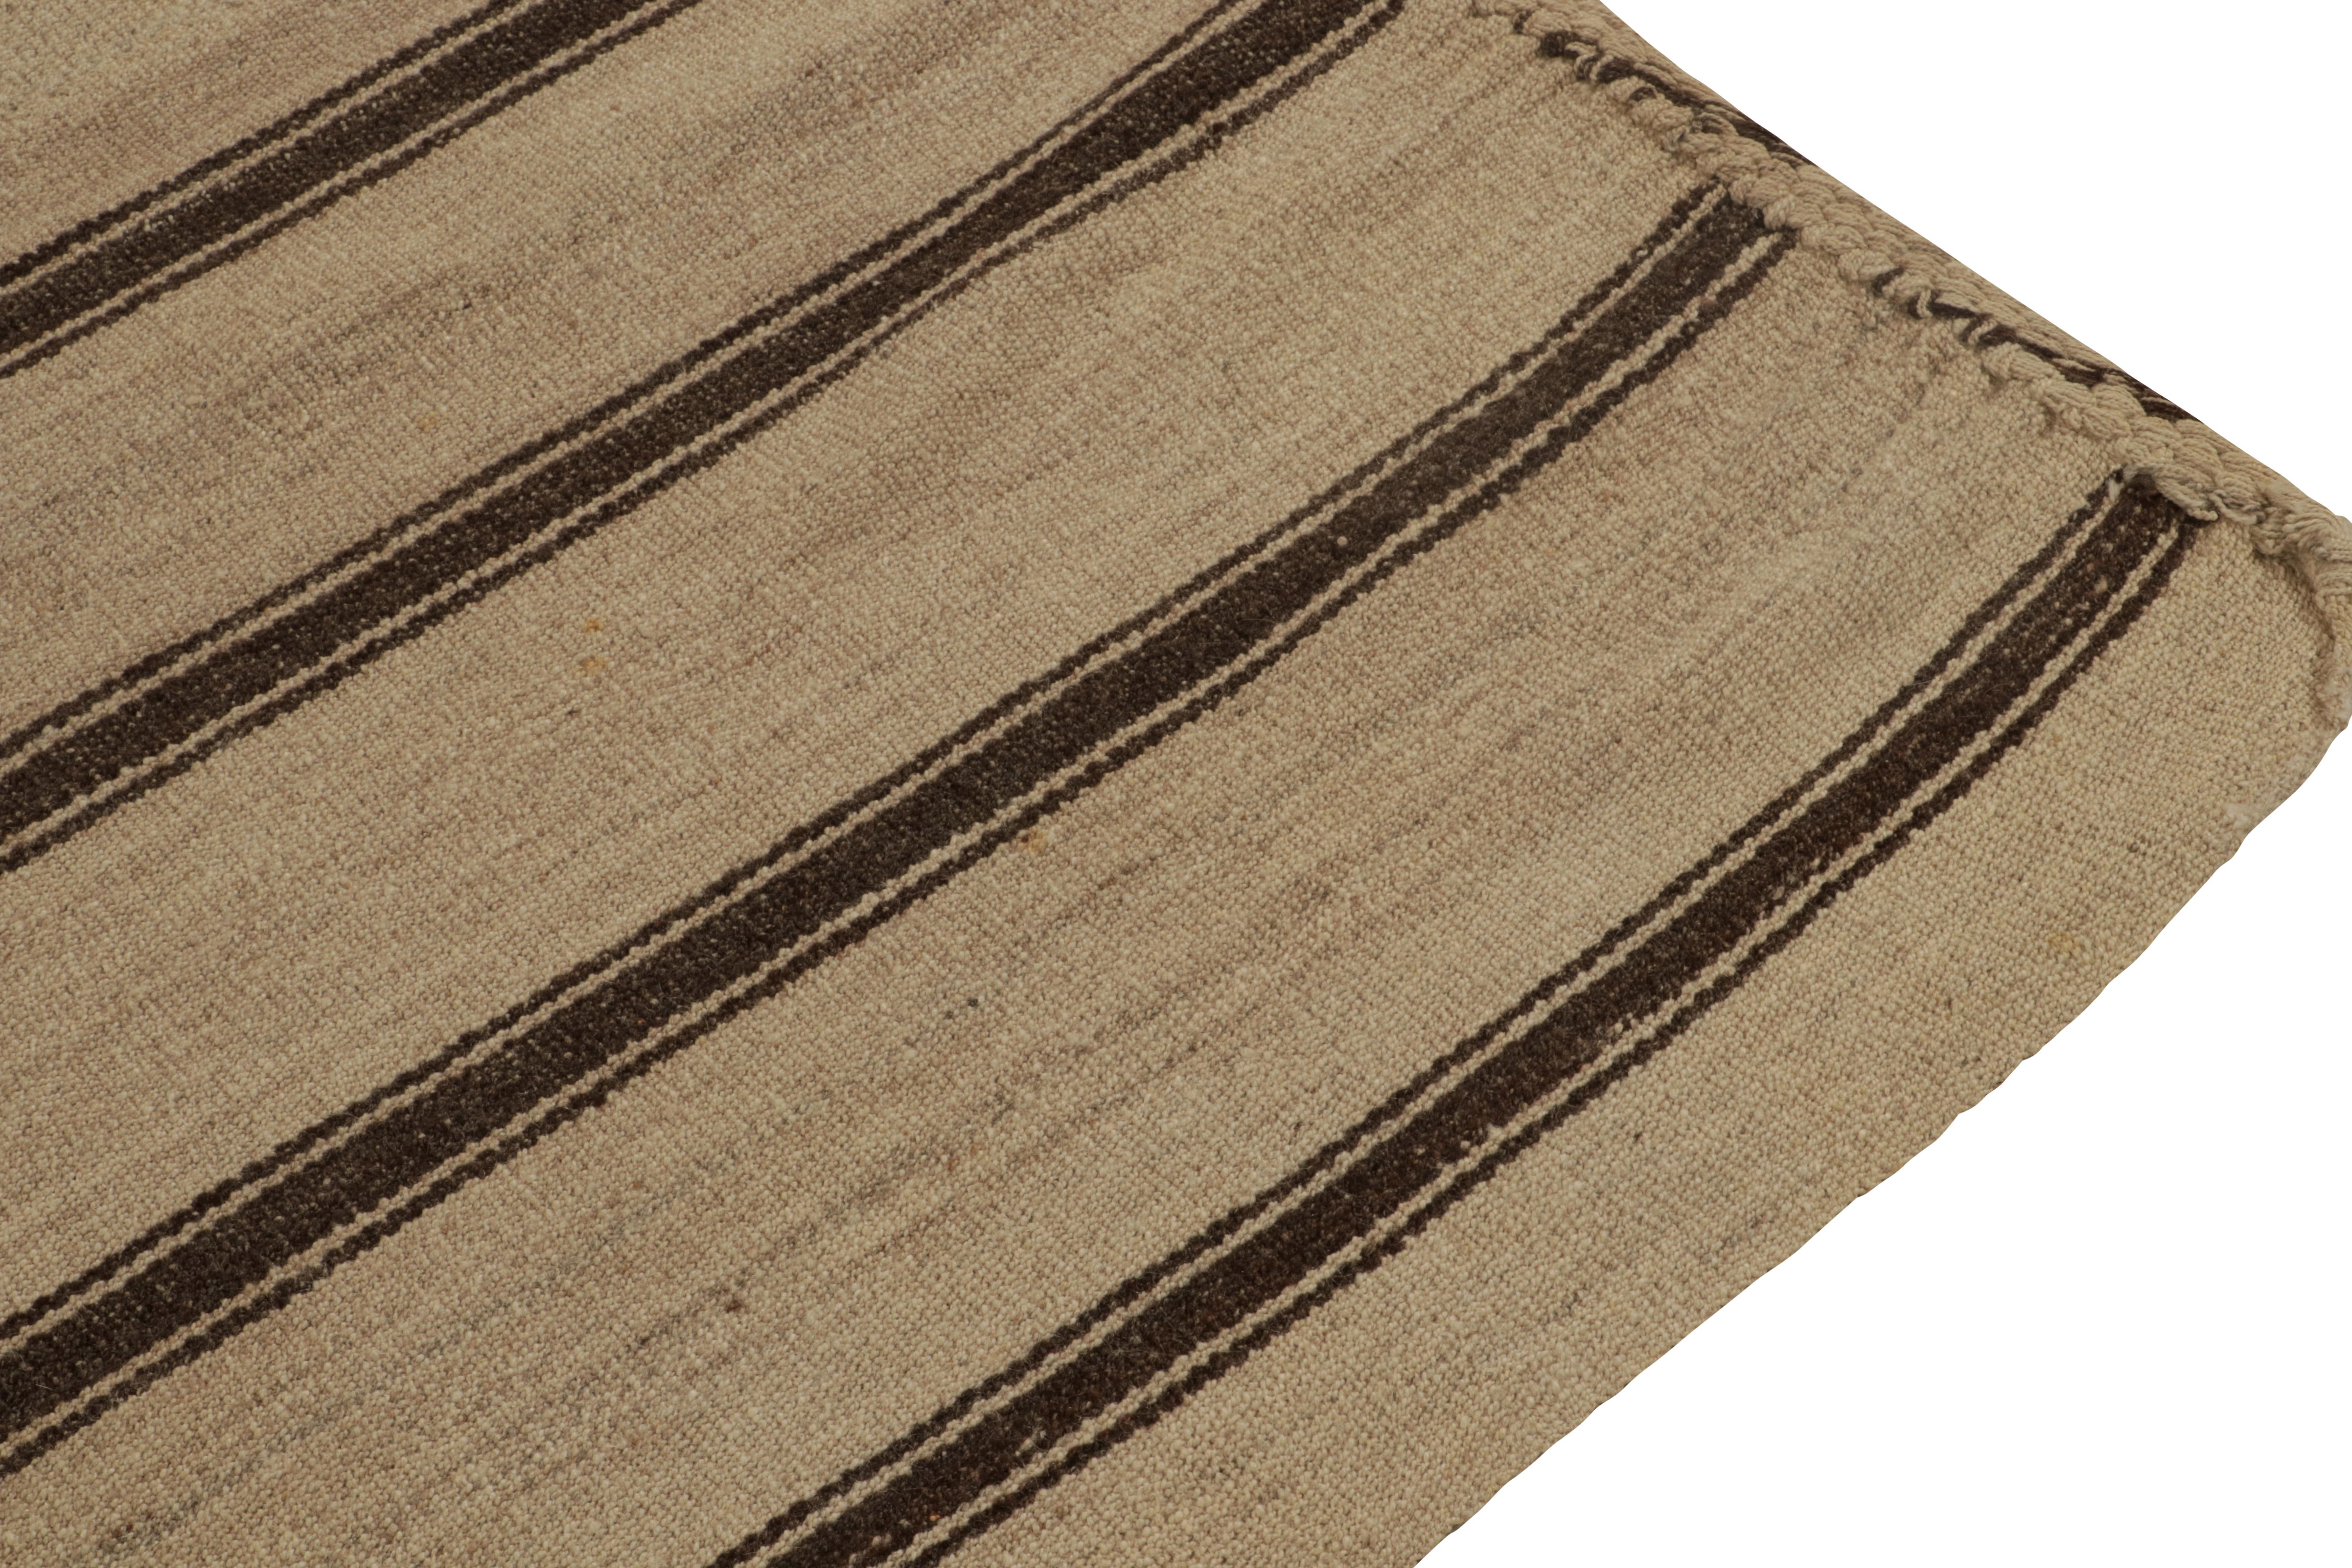 Handwoven Vintage Kilim Beige-Brown Stripe Patterns by Rug & Kilim In Good Condition For Sale In Long Island City, NY